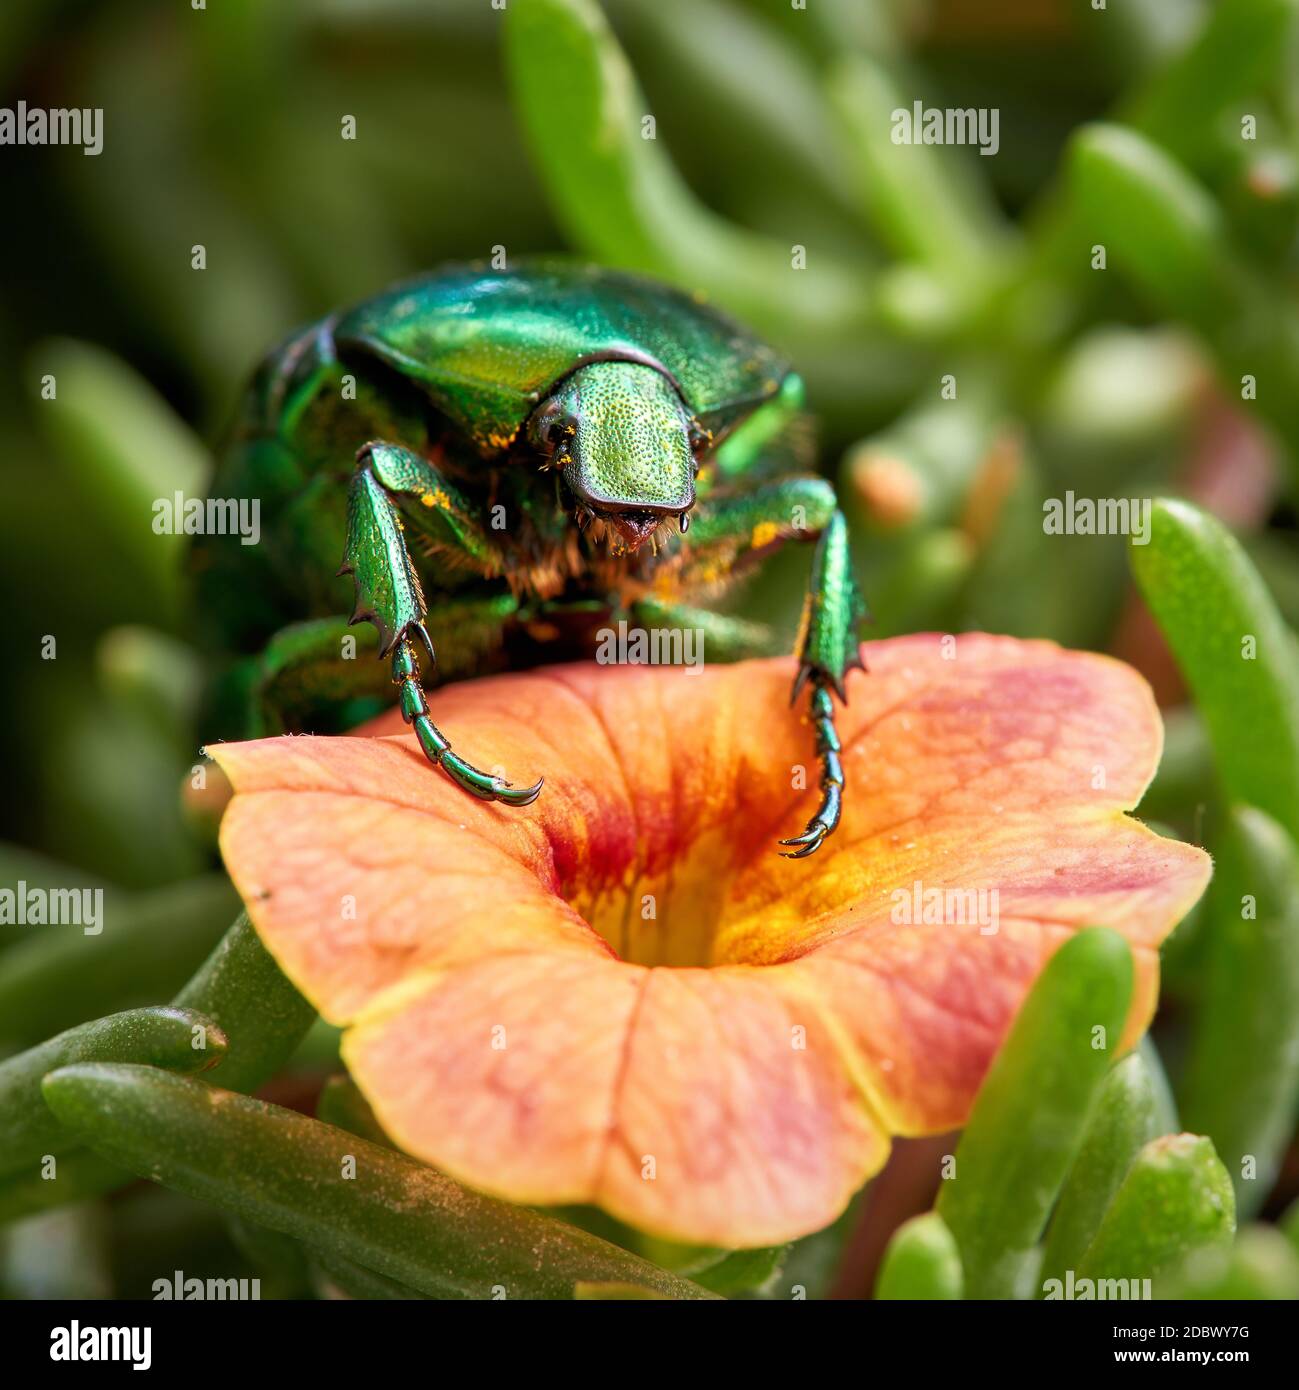 Rose beetle (Cetonia aurata) on a flower in the garden Stock Photo